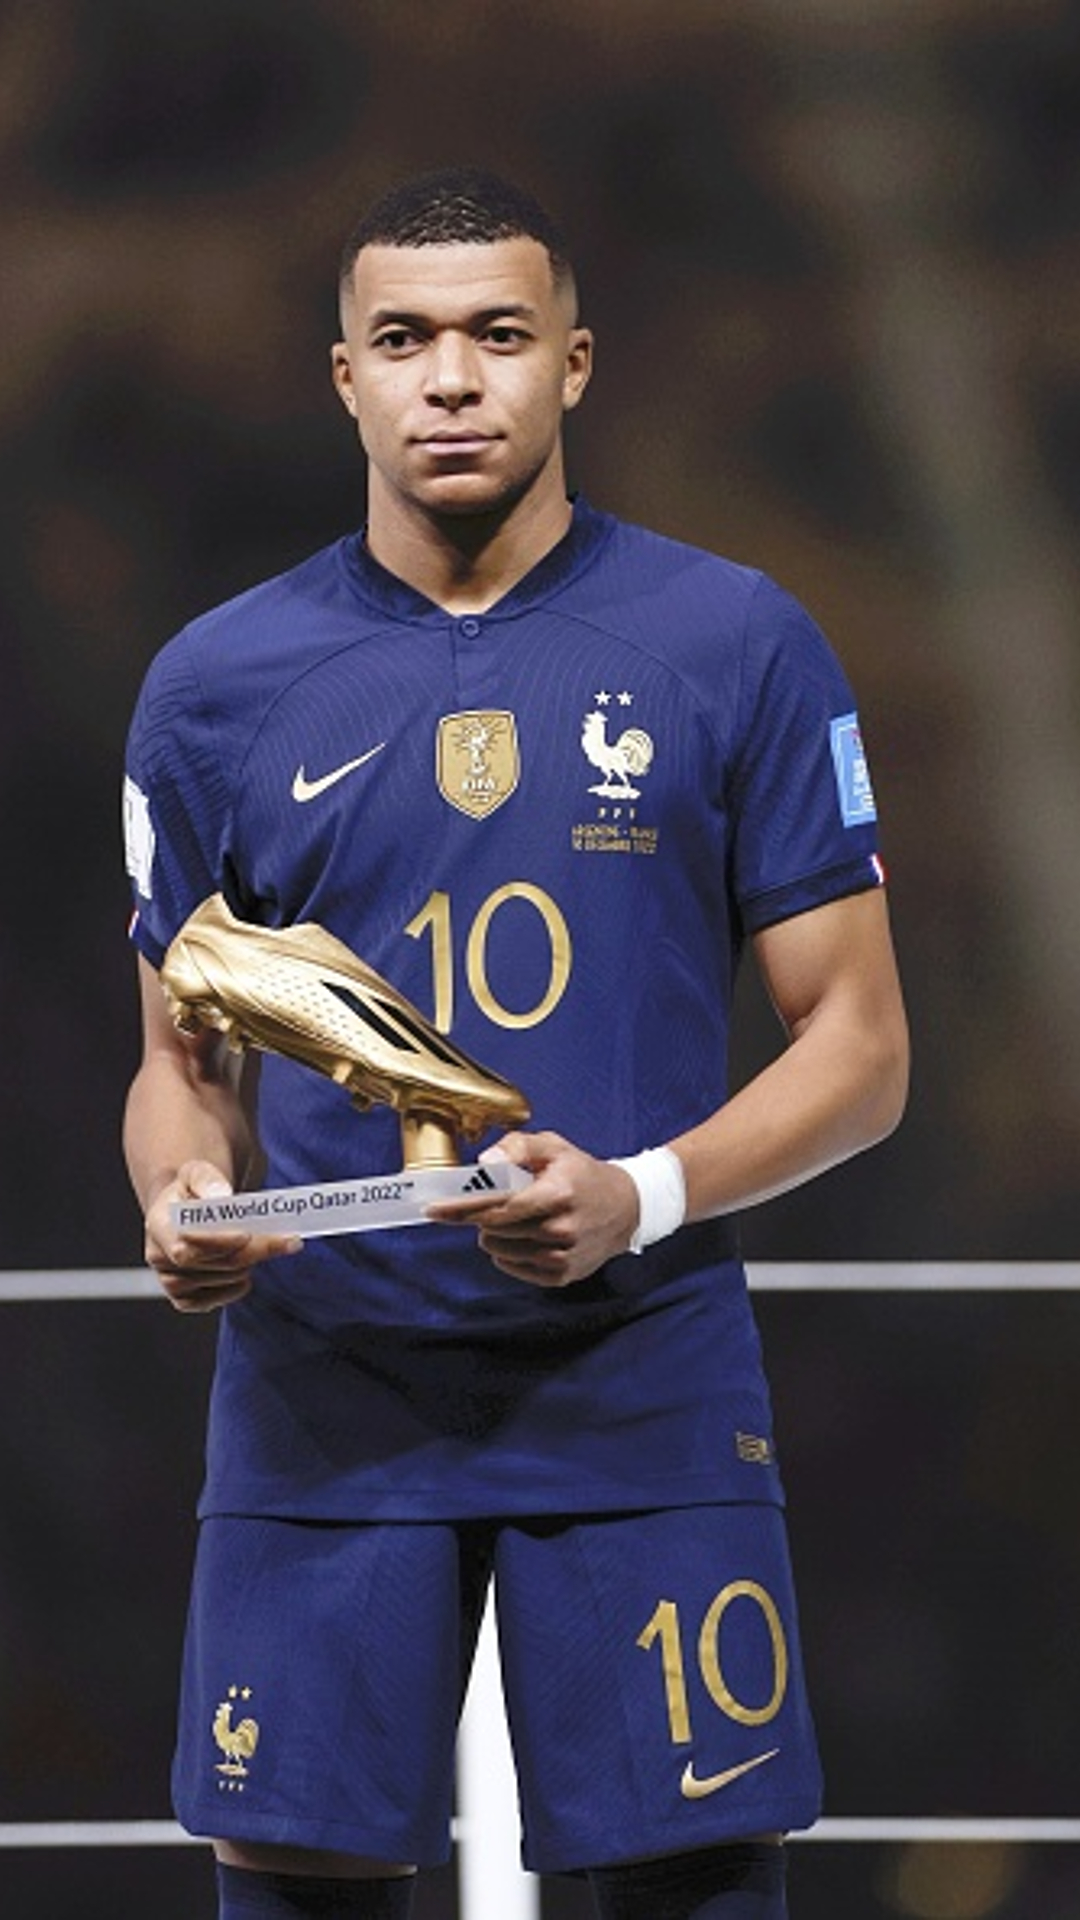 Fifa World Cup 2022 Mbappe Secures Golden Boot With 8 Goals Messi Settles For Silver Boot With